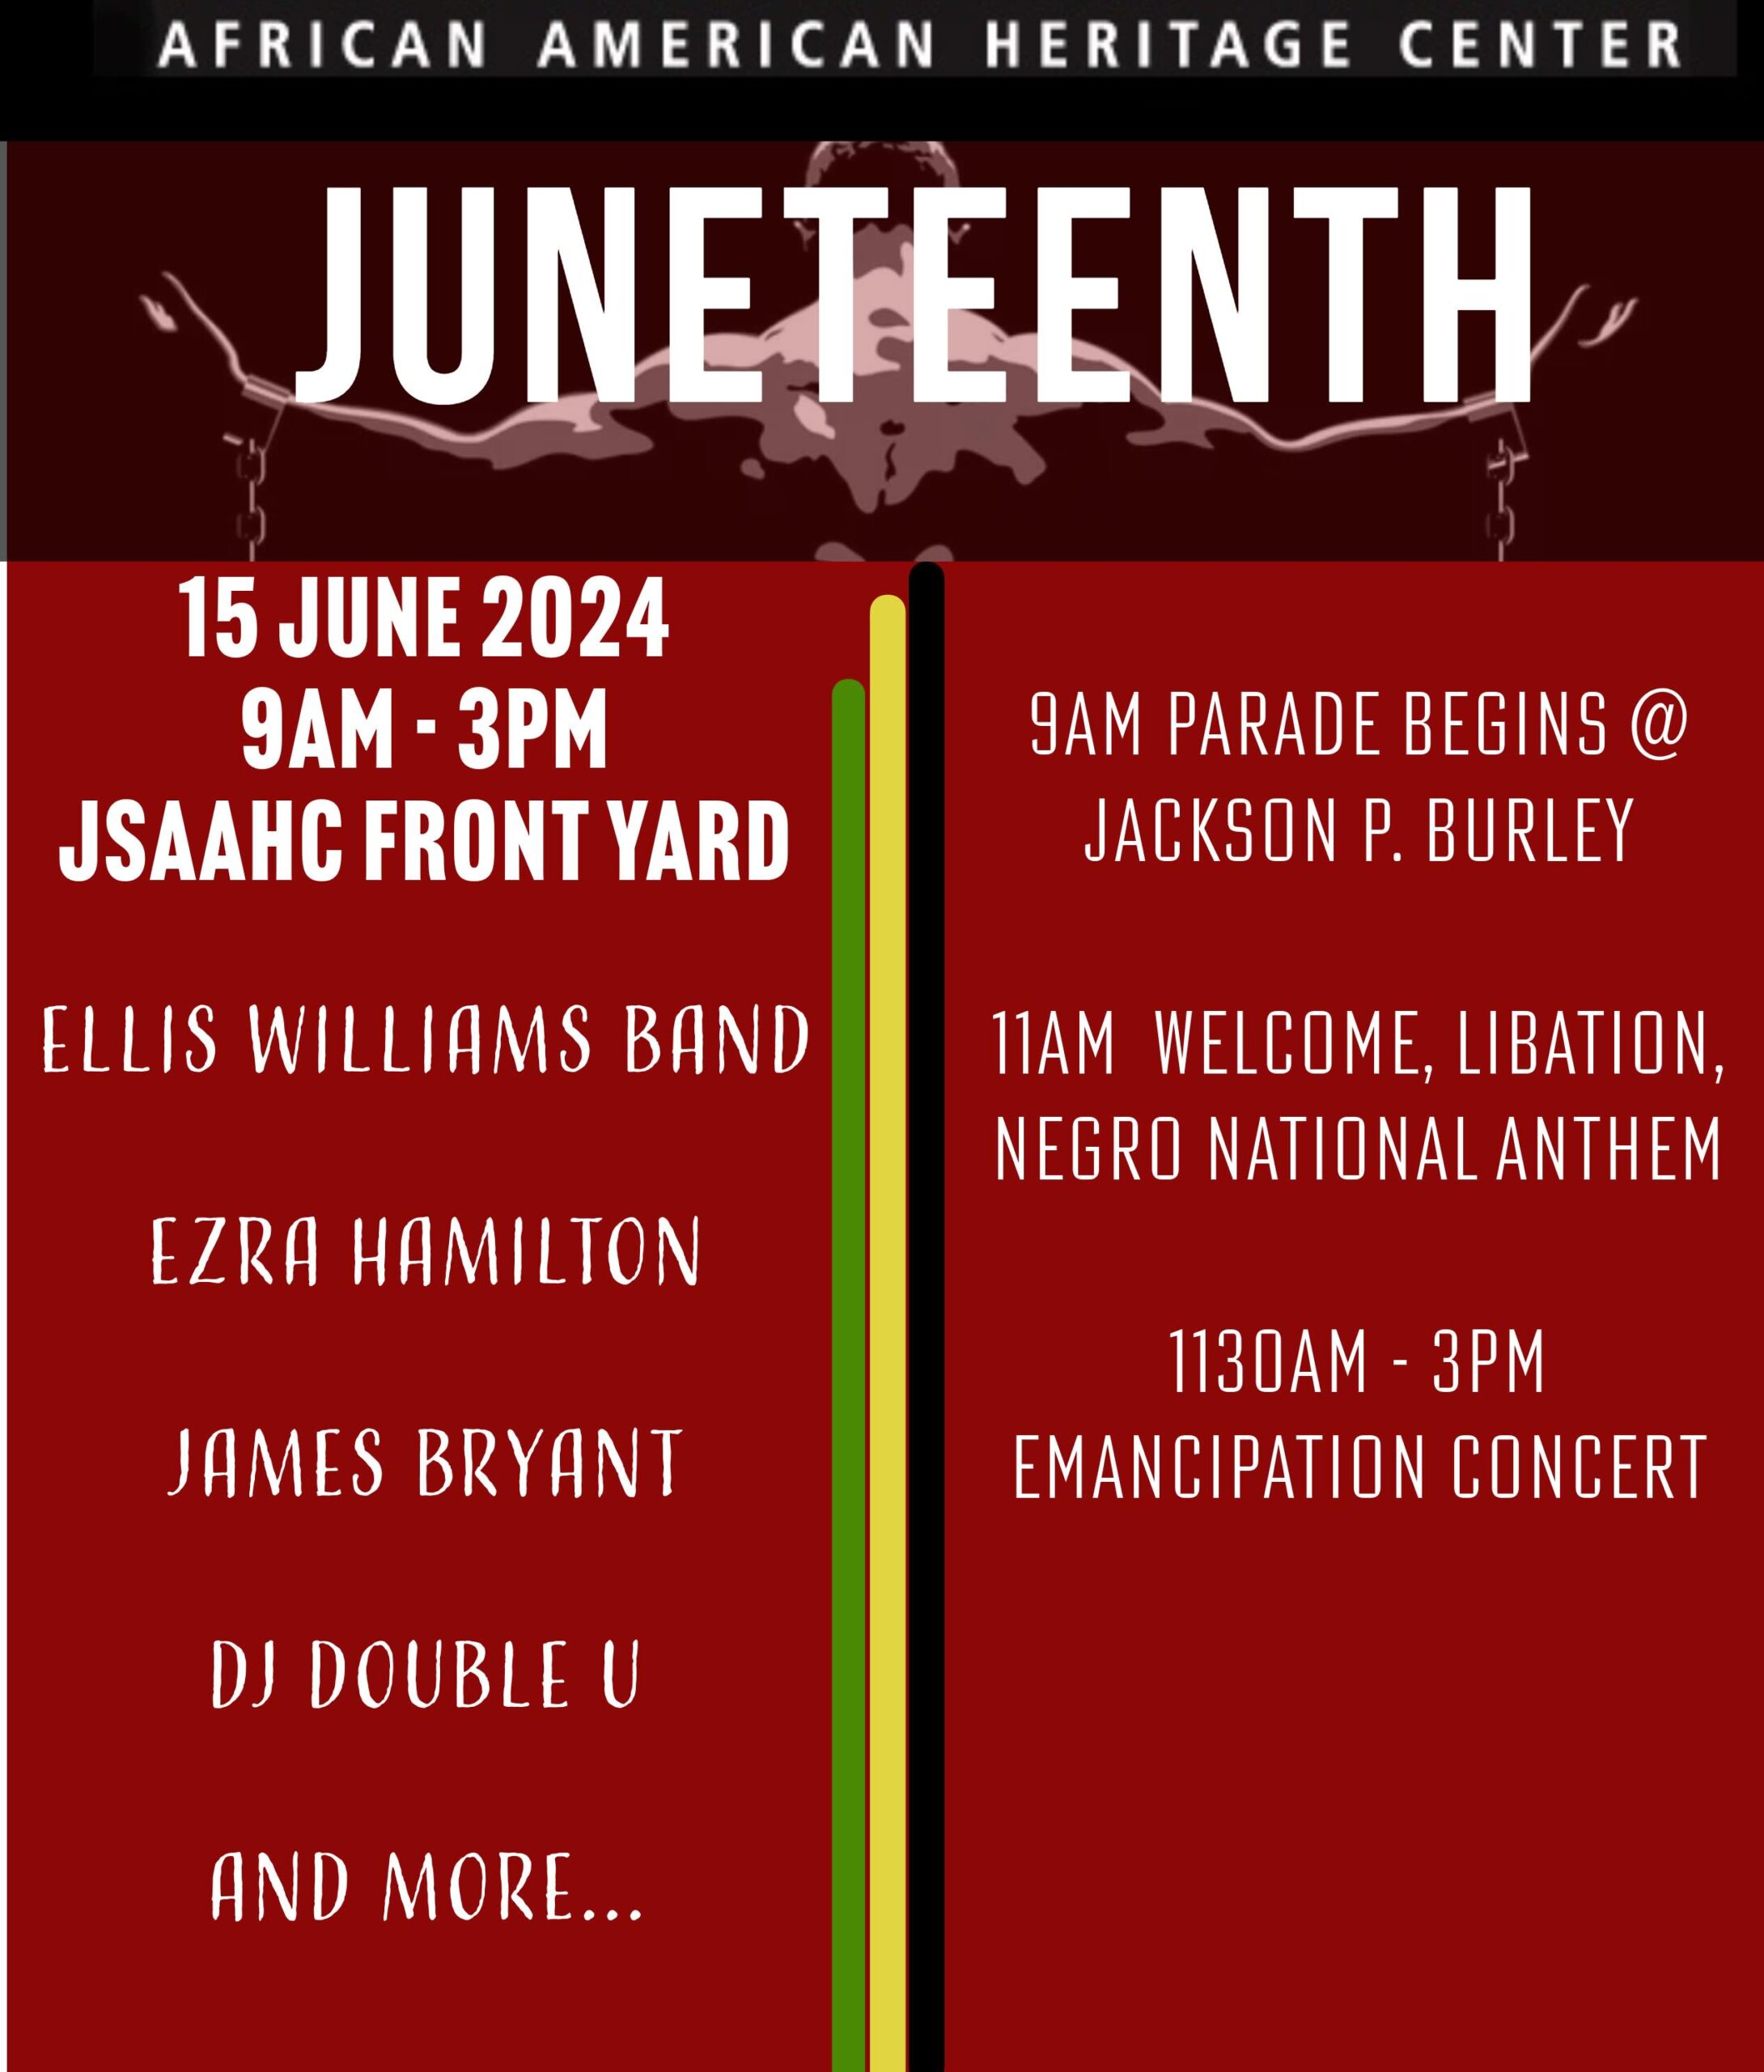 Poster with black background at top with background image of a black man in chains reading -"African American Heritage Center Juneteenth" and below are 2 columns with performers' names and location and times